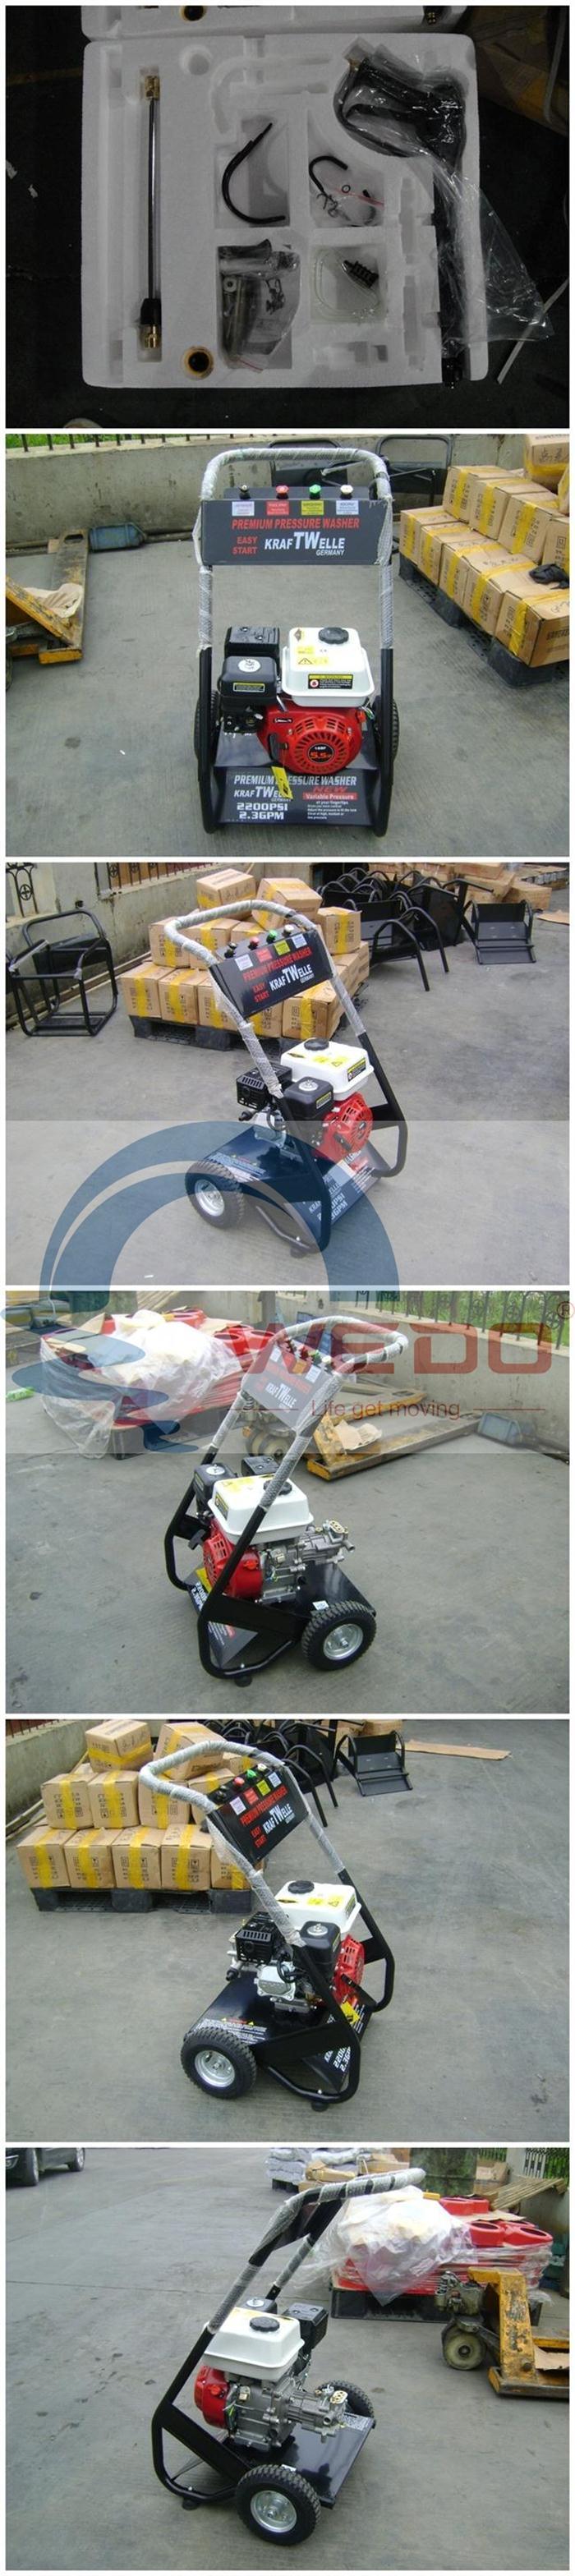 Wdpw3200d Household and Industrial 11.0HP/13.0HP Diesel Engine High Pressure Washer/Cleaner